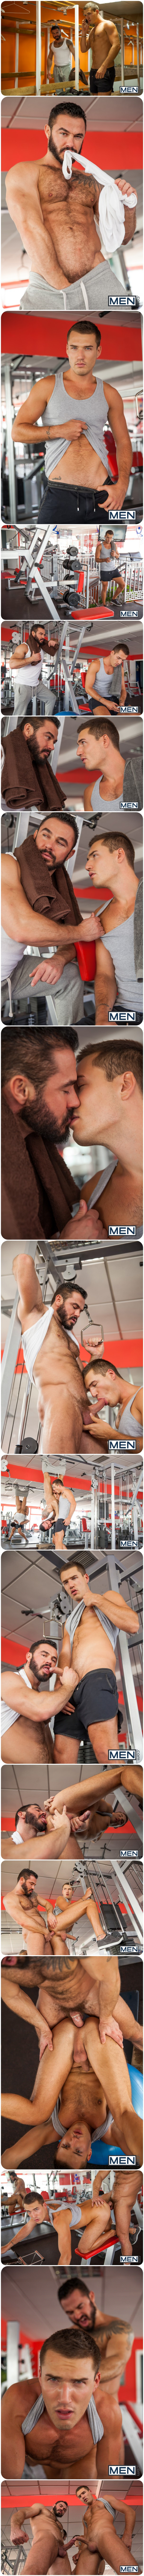 Men of UK, Jessy Ares, Theo Ford